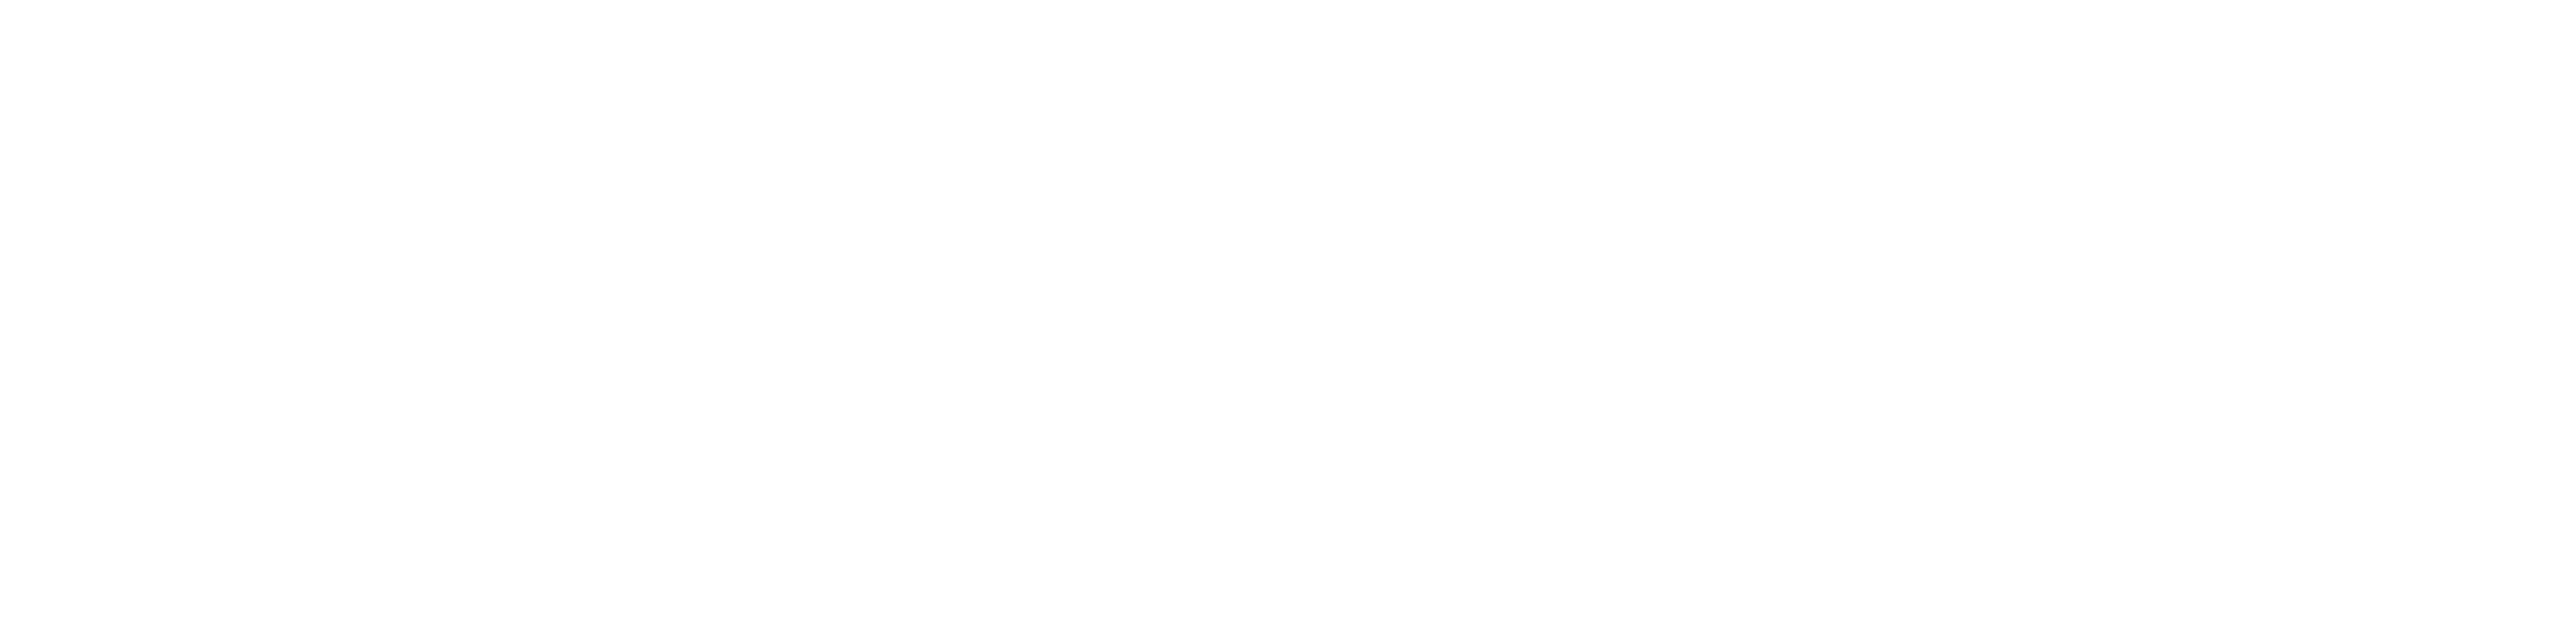 The image shows the BEREC hashtag #empoweringEUconnectivity